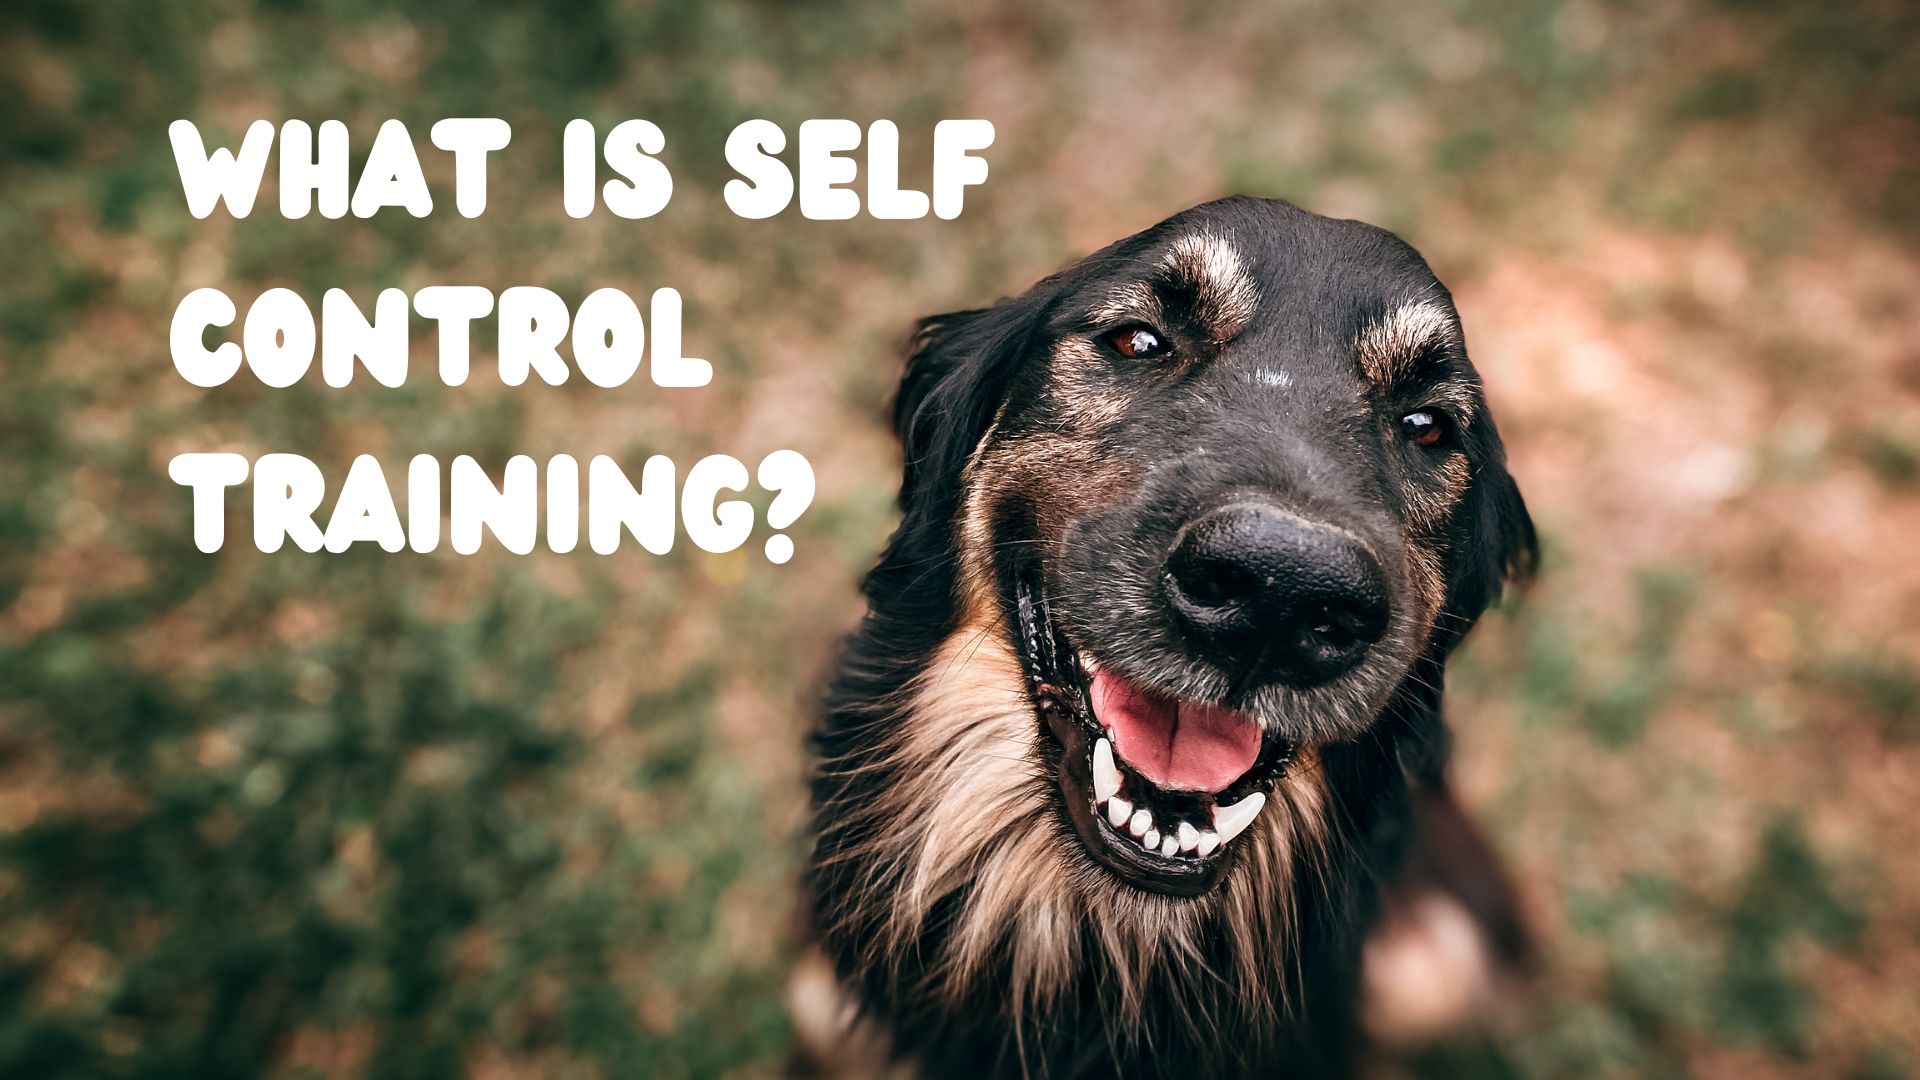 What is self control training?